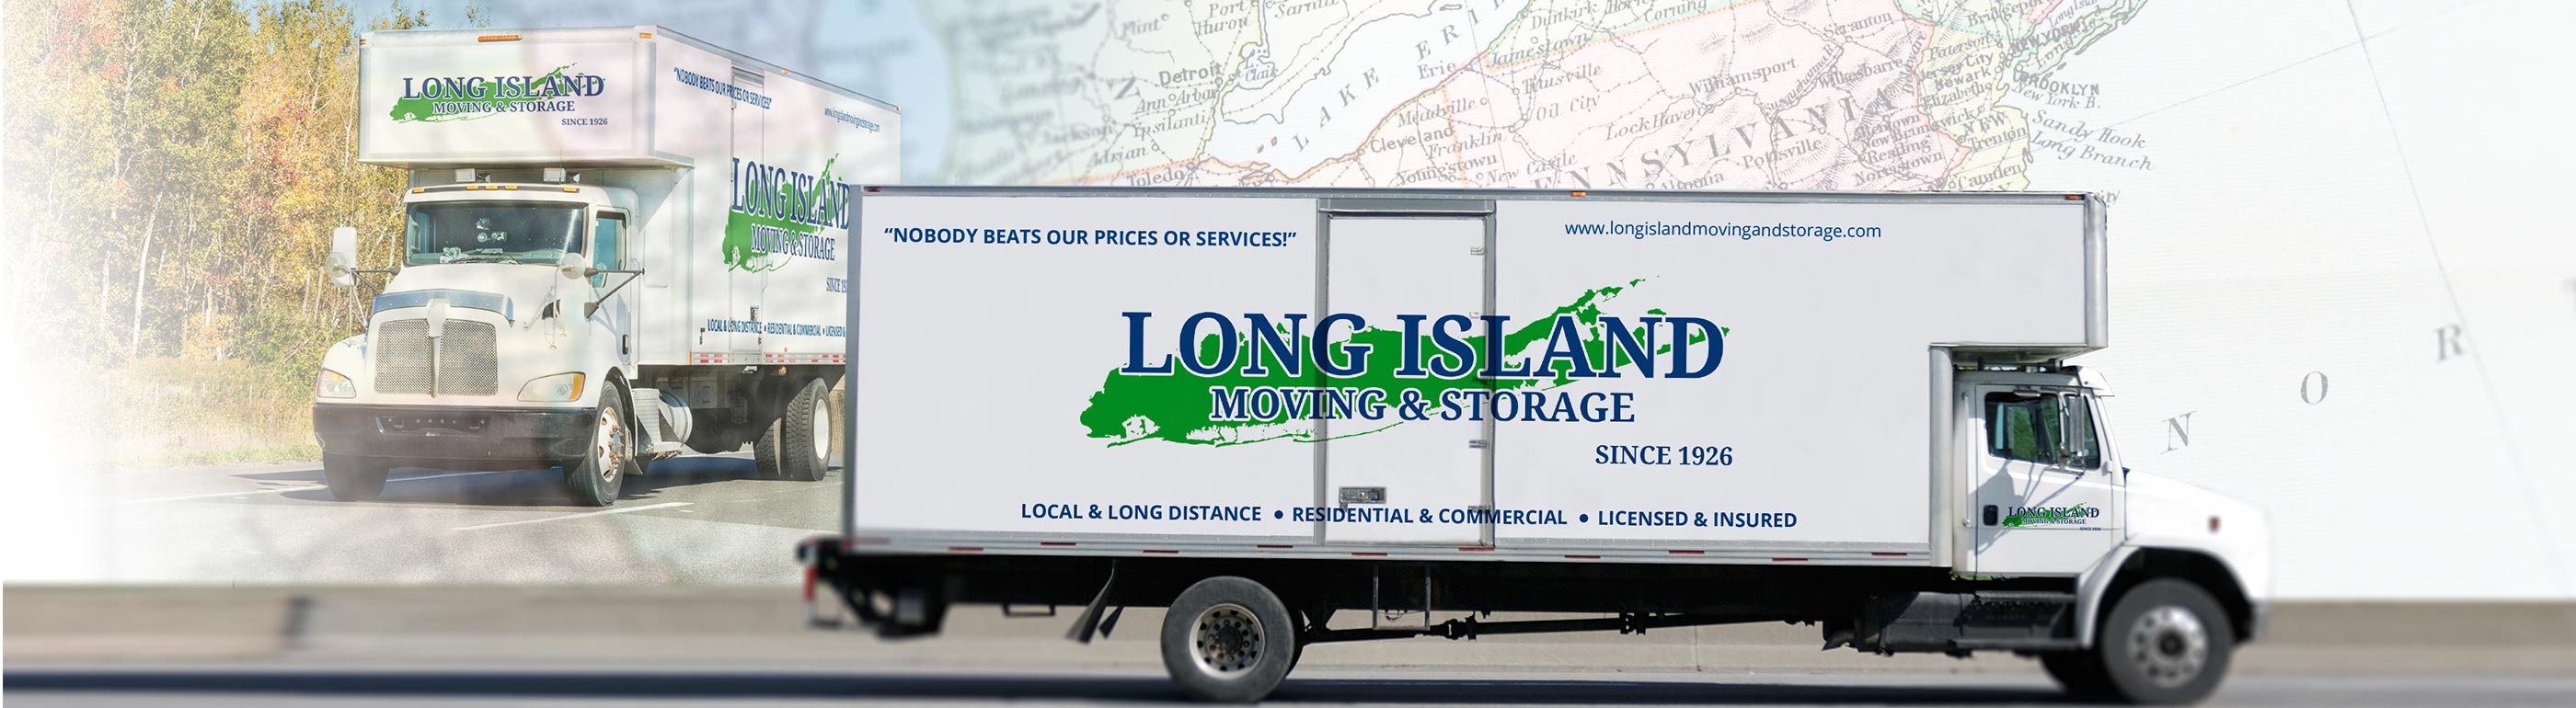 Long Island Moving & Storage Moving Truck